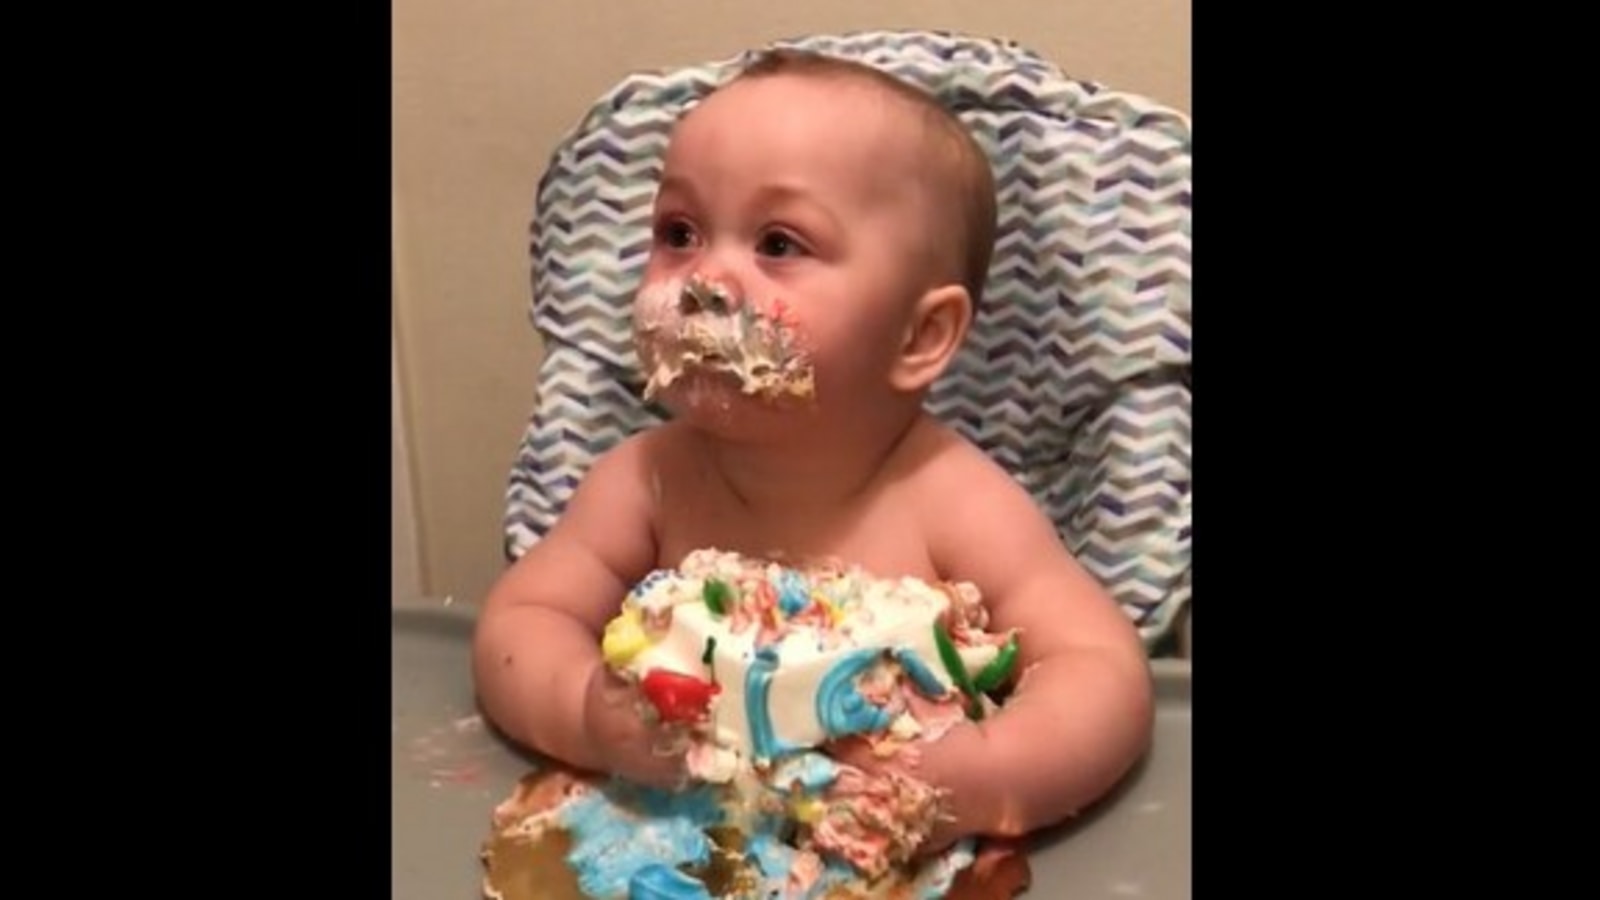 Baby's way of eating birthday cake makes people say they want to ...